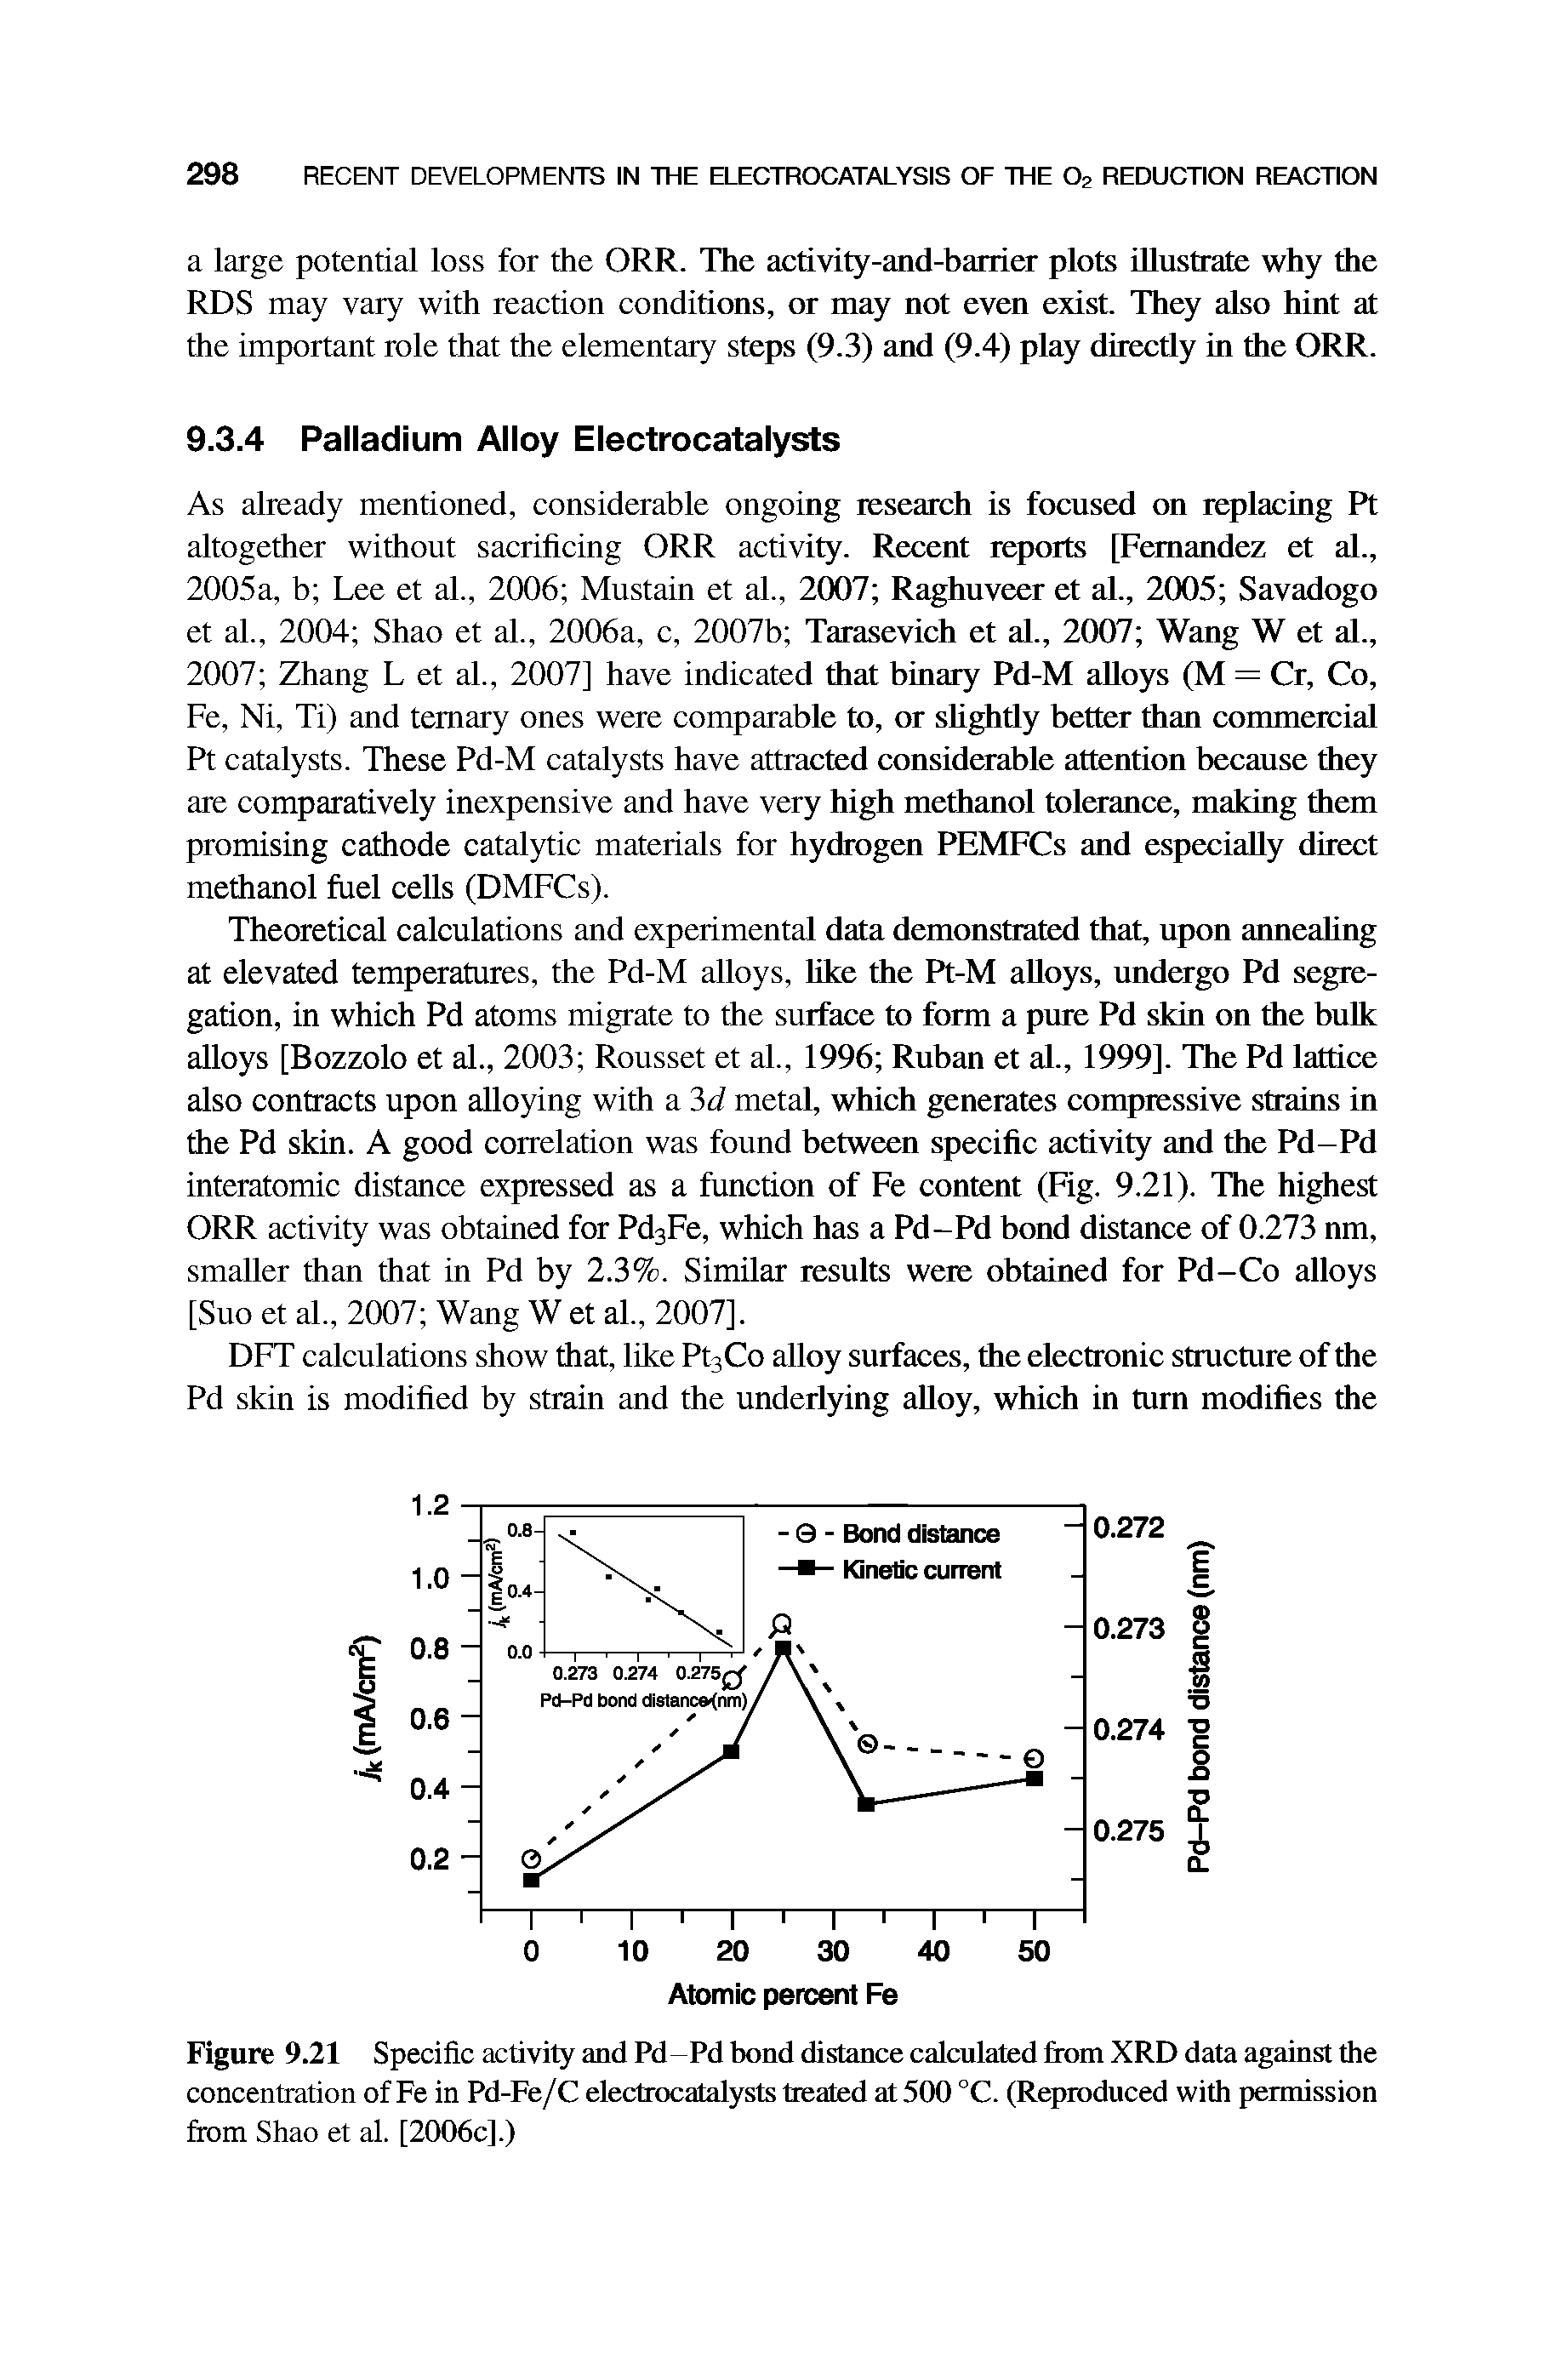 Figure 9.21 Specific activity and Pd-Pd bond distance calculated from XRD data against the concentration of Fe in Pd-Fe/C elecfrocatalysts treated at 500 °C. (Reproduced with permission from Shao et al. [2006c].)...